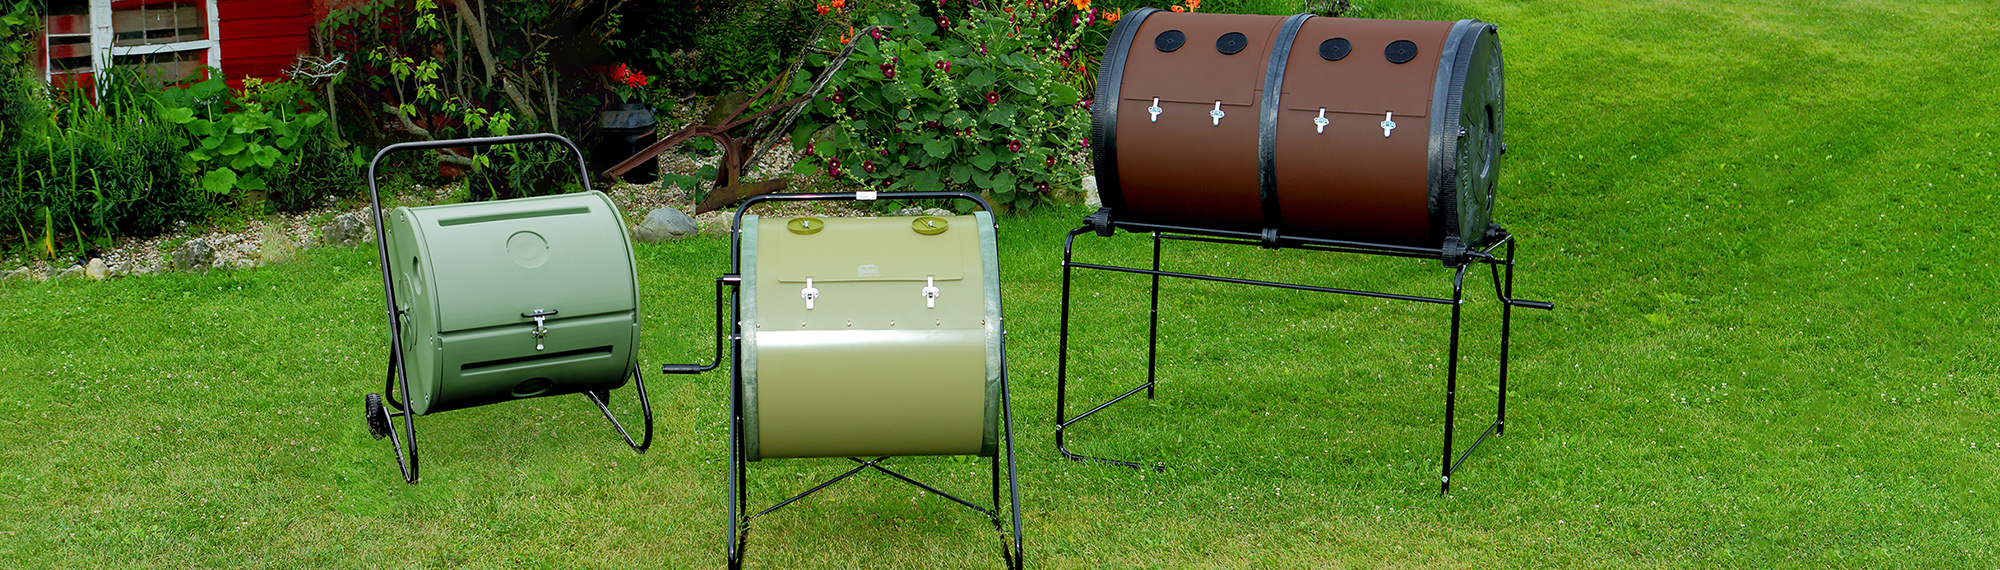 Mantis Composters by Schiller Grounds Care